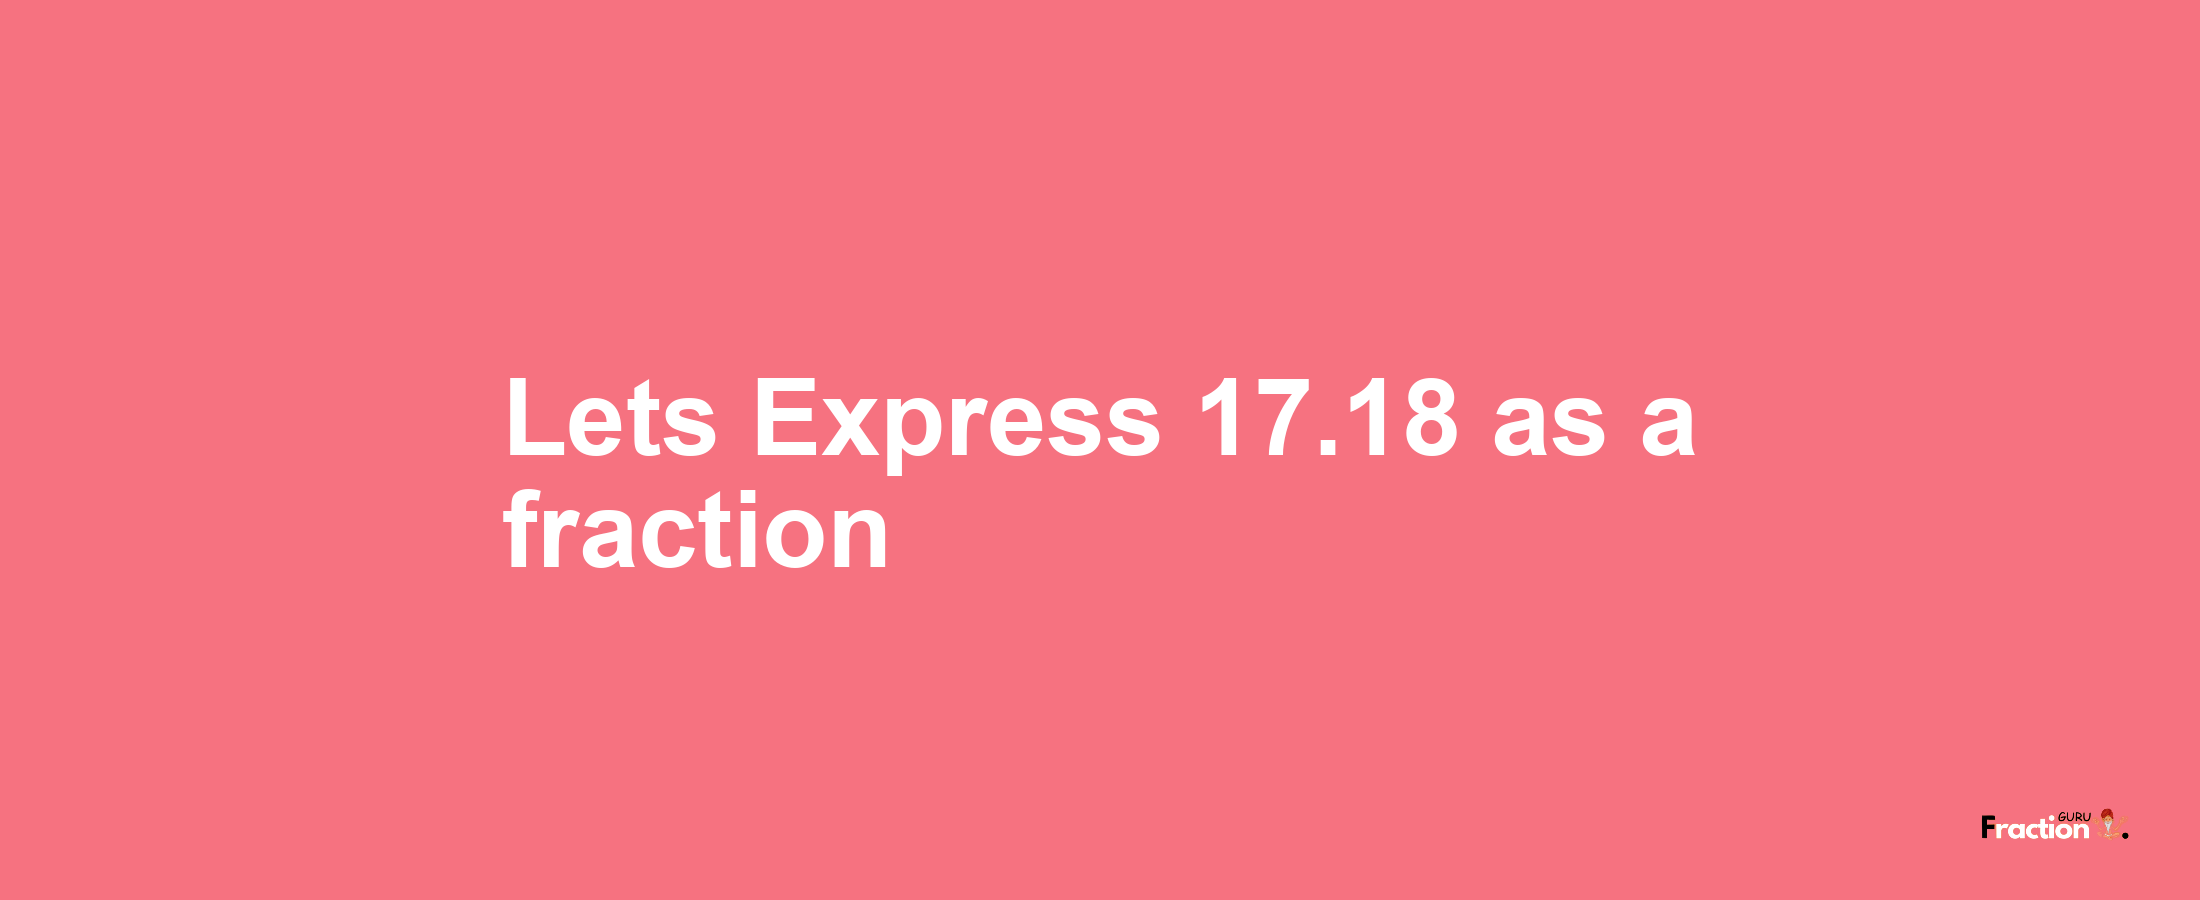 Lets Express 17.18 as afraction